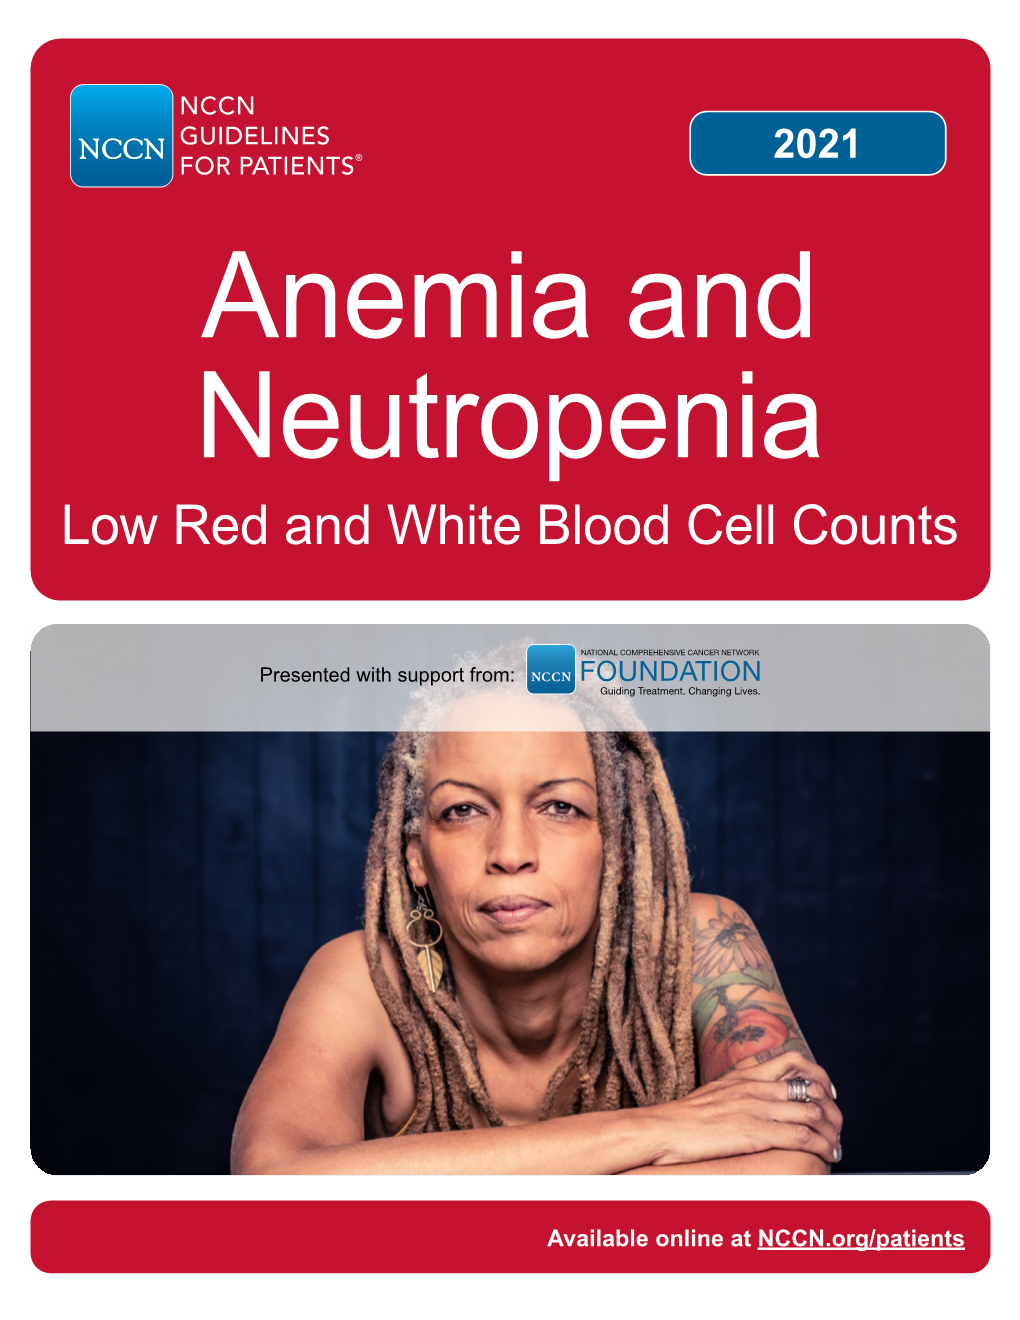 NCCN Guidelines for Patients Anemia and Neutropenia